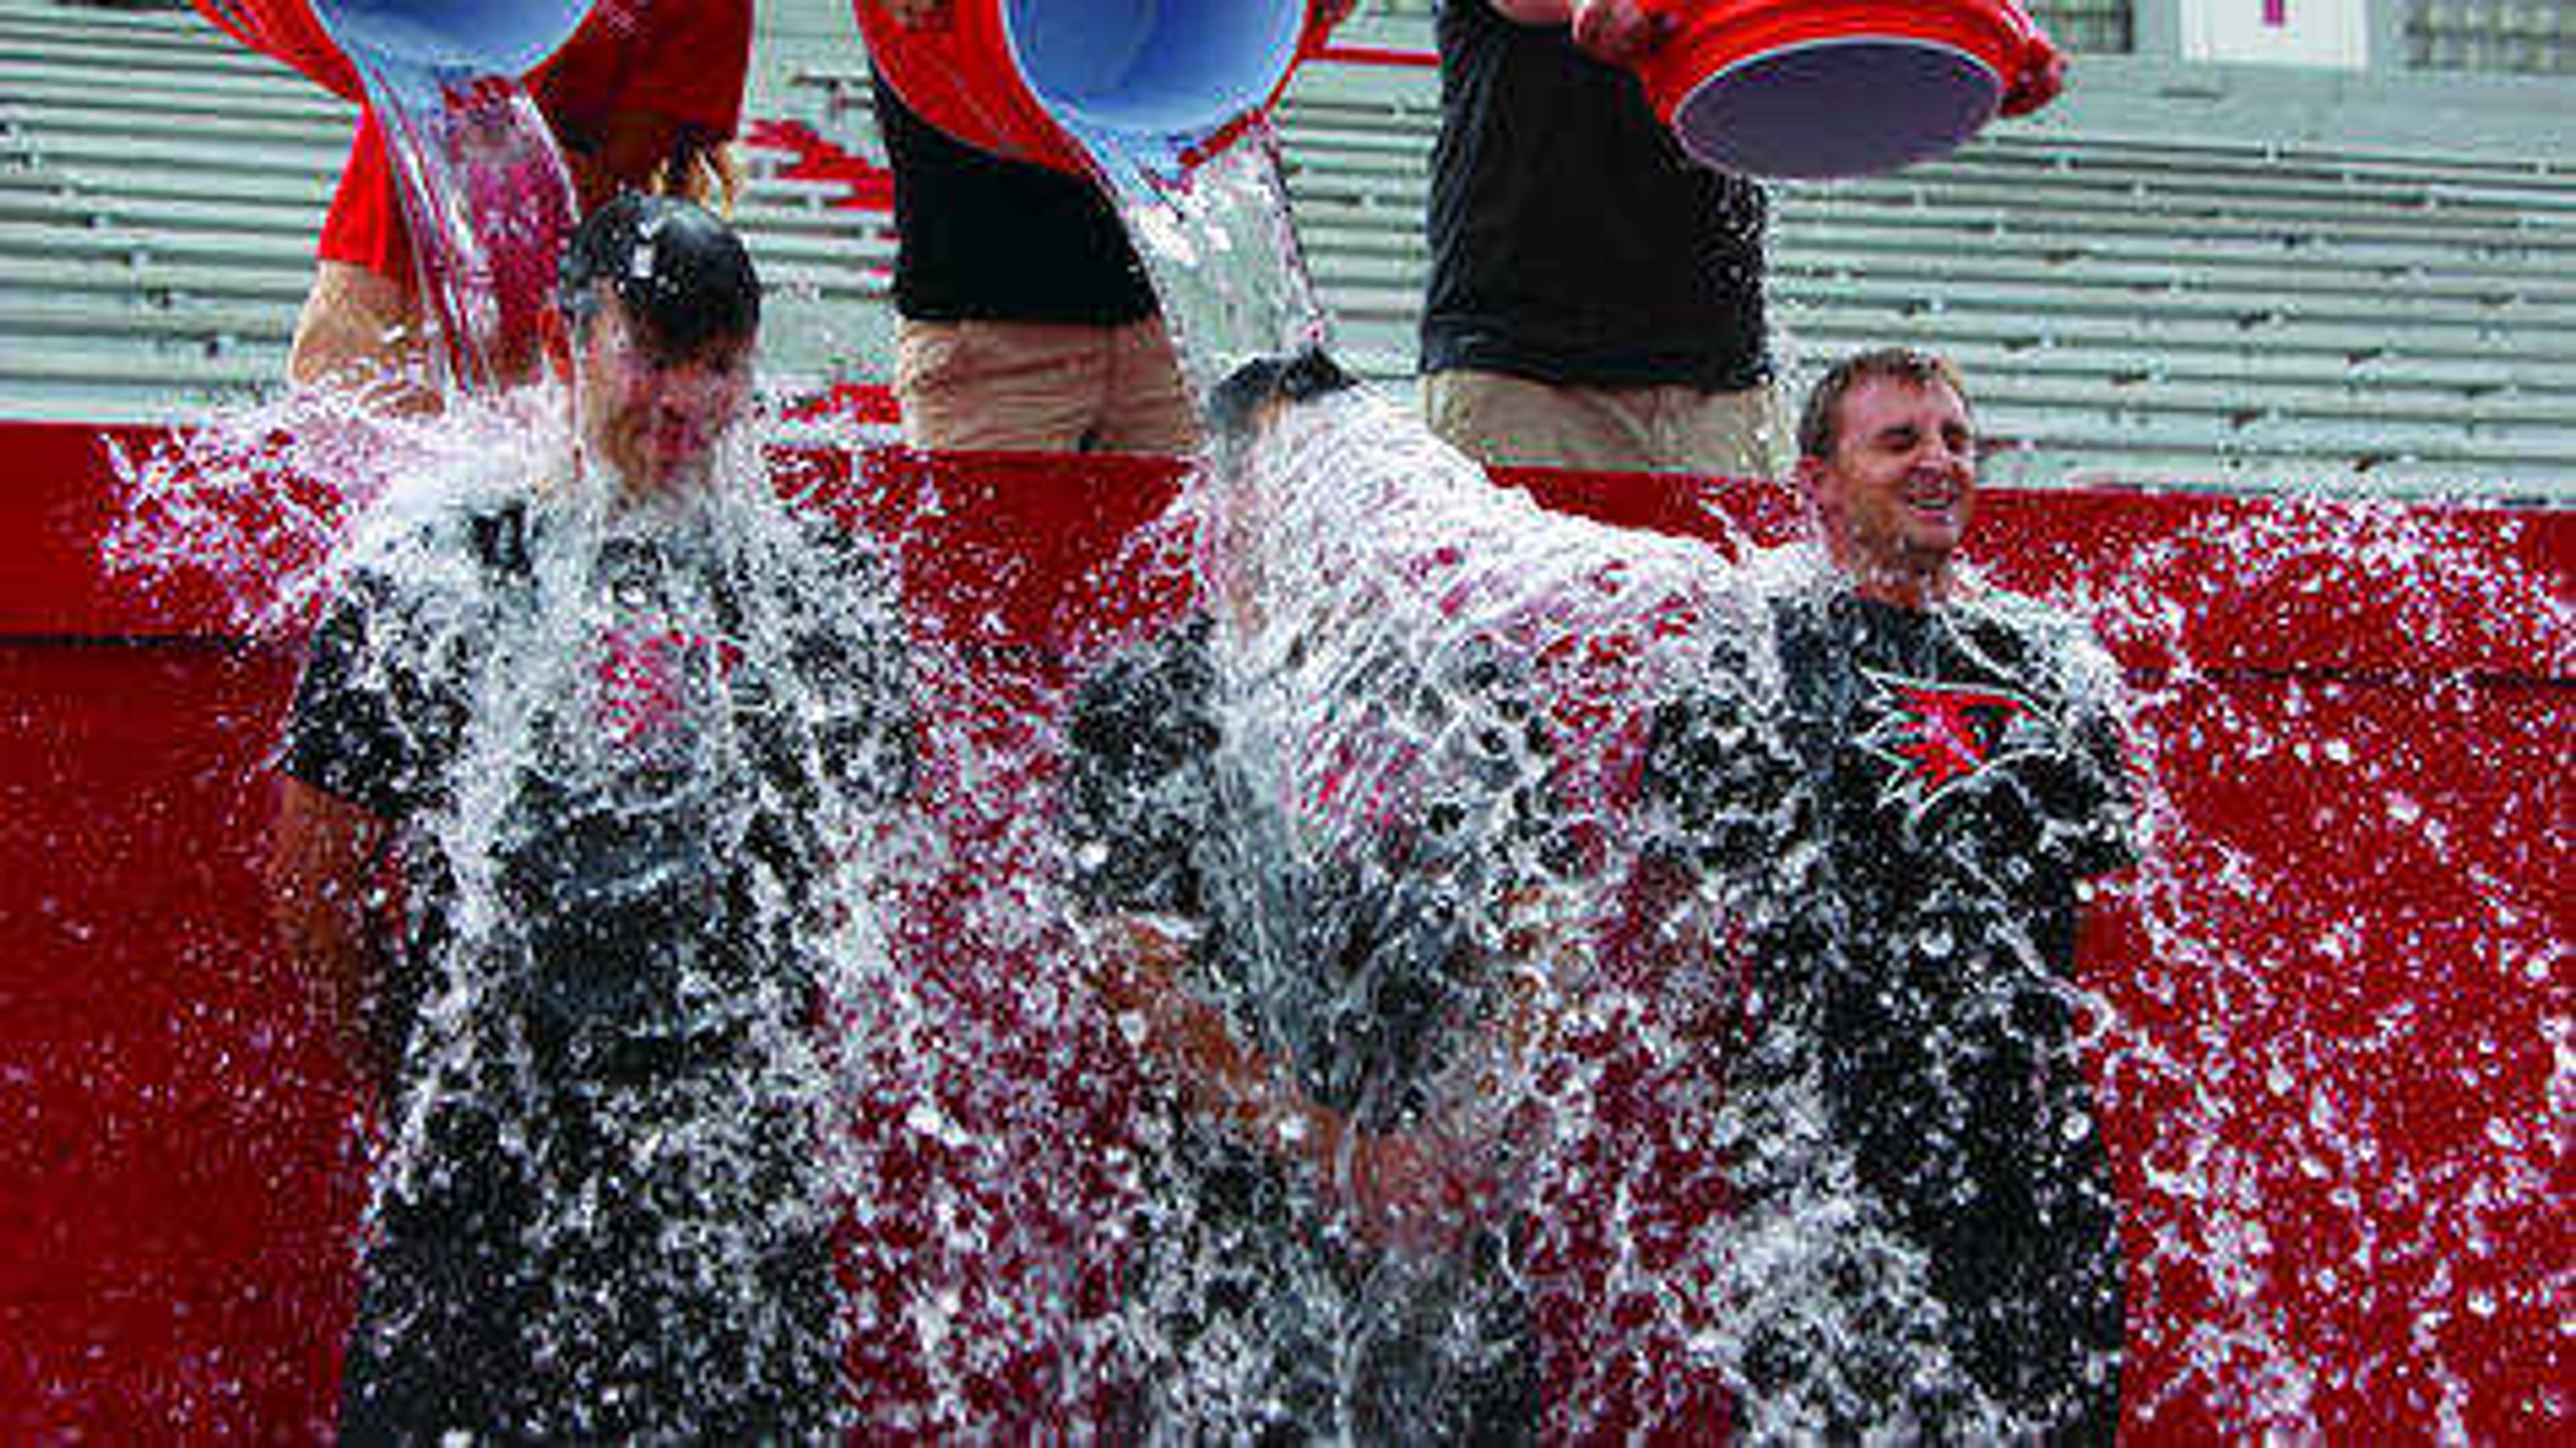 Dillon Lawson, Steve Bieser and Lance Rhodes take on the Ice Bucket Challenge to raise awareness for ALS. Submitted photo